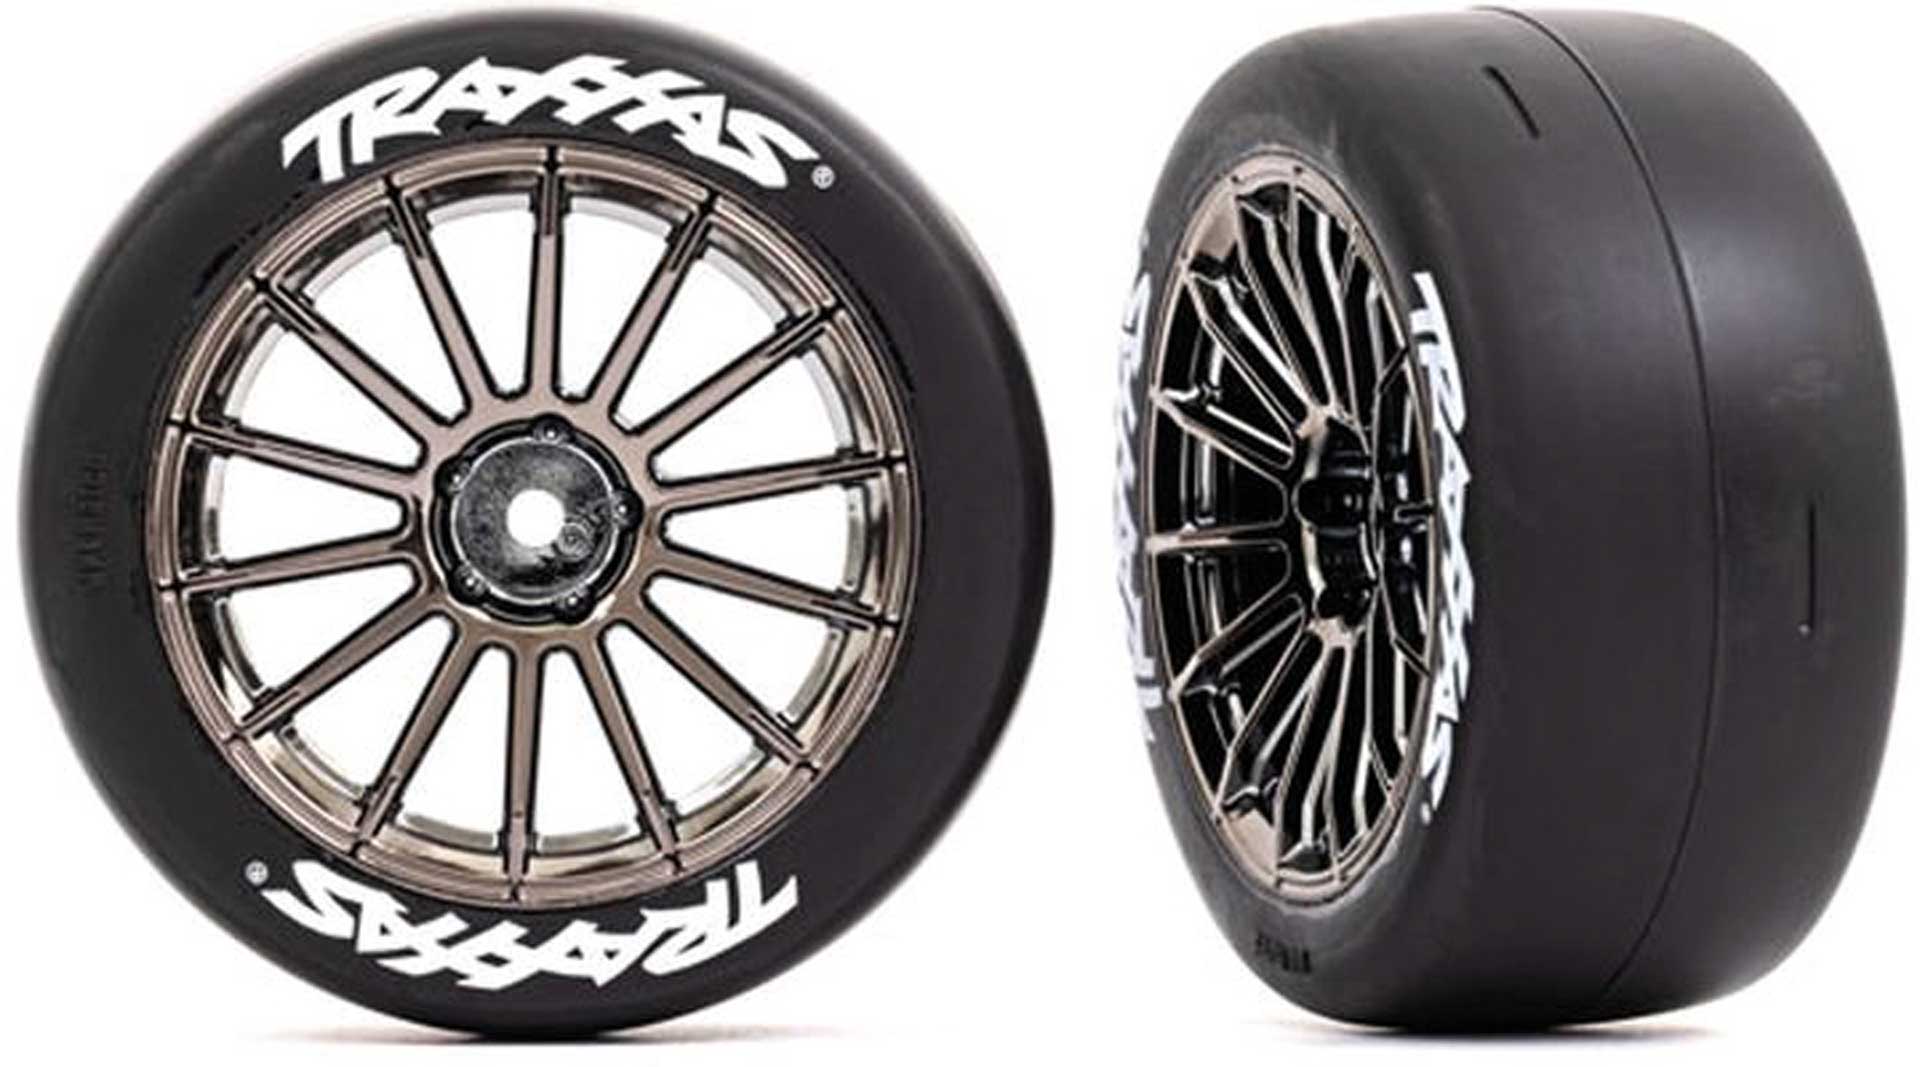 TRAXXAS TIRES ON RIM MULTI-SPOKES BLACK CHROME RIM 2.0 + S WITH INSERTS VO (2) (VXL RATED)